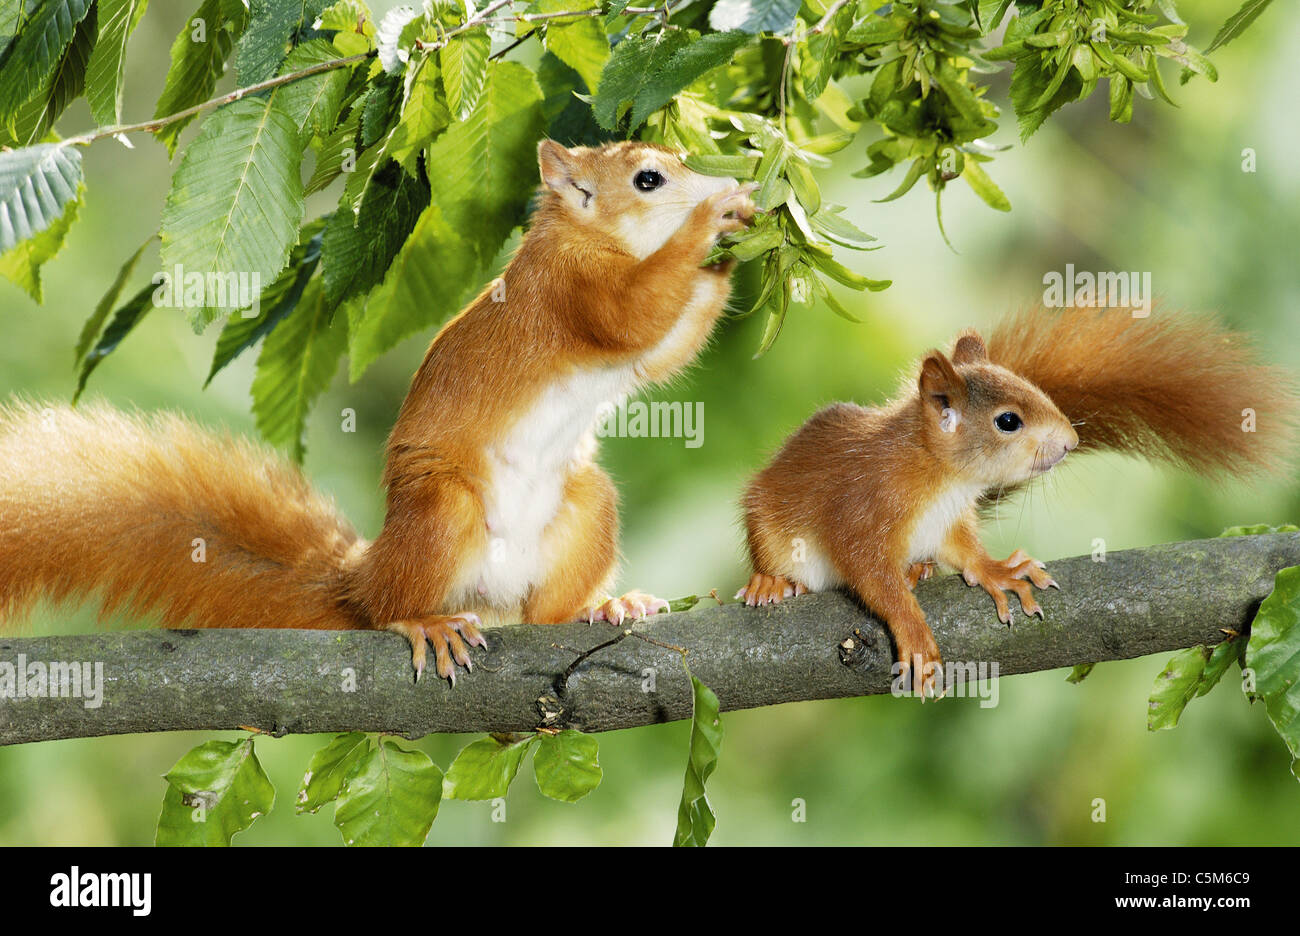 European red squirrel with cub on tree Stock Photo